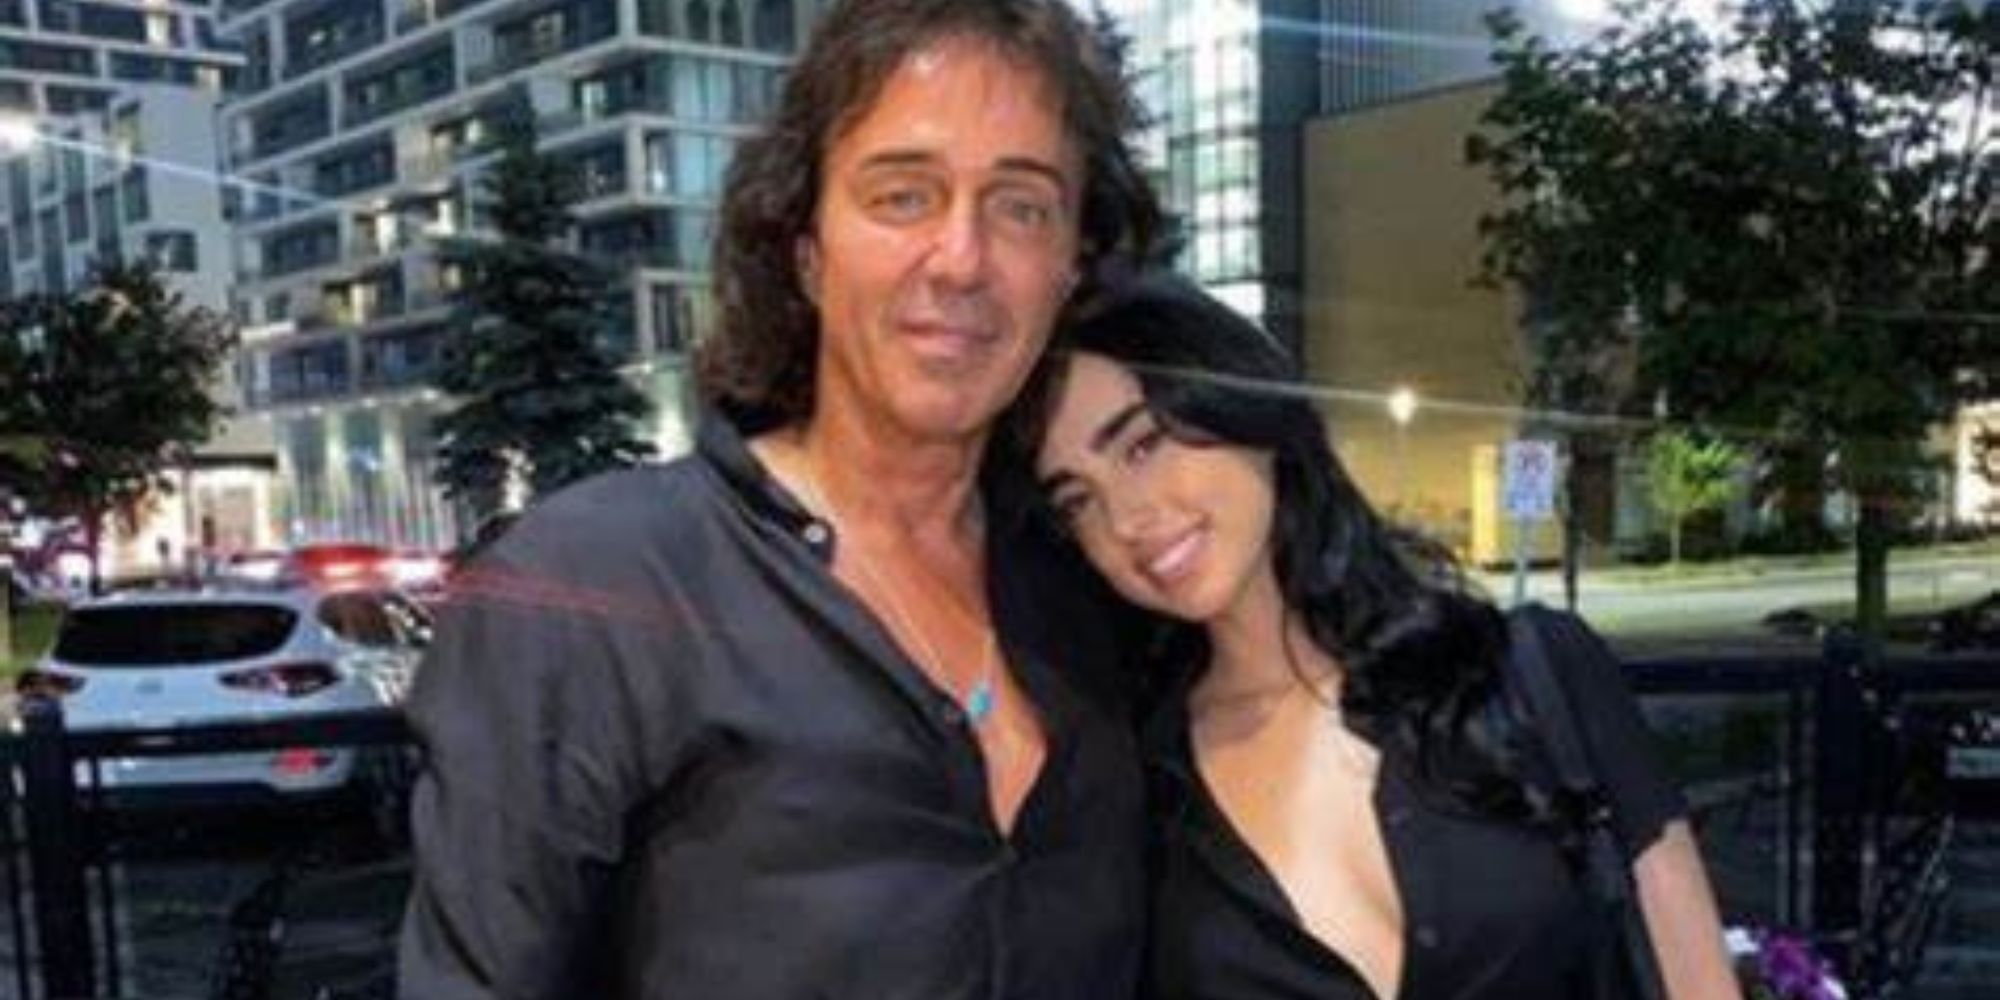 The bachelor 28 maria georgas and father nick georgas posing arm in arm at night in front of a building